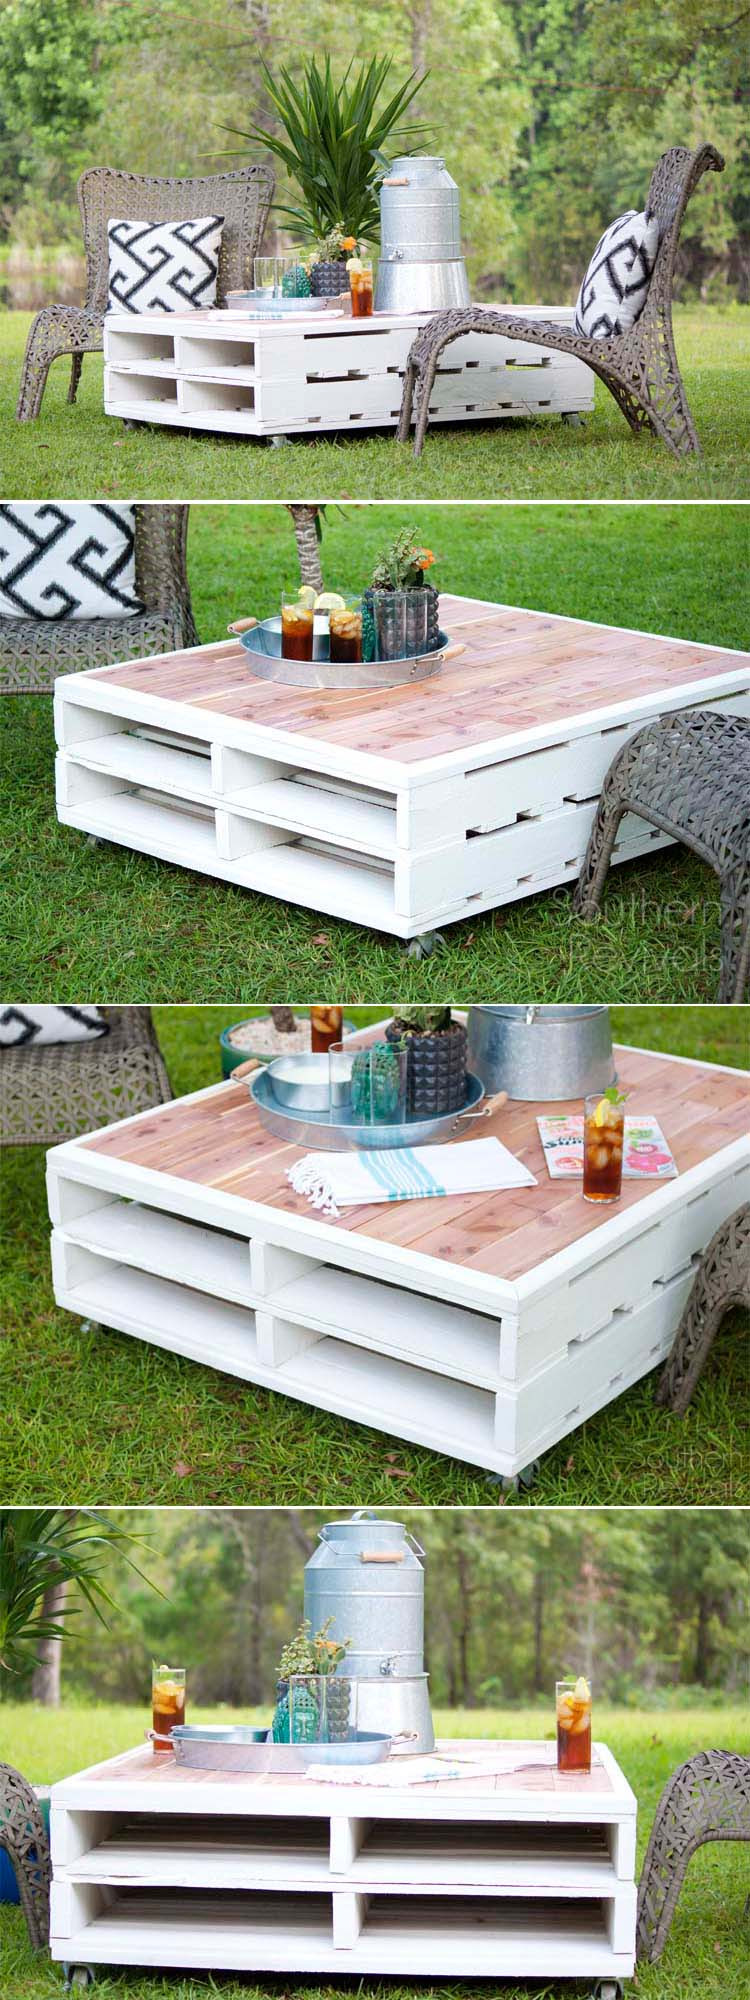 DIY Outdoor Coffee Table
 DIY Pallet Coffee Table Gets an Outdoor Makeover